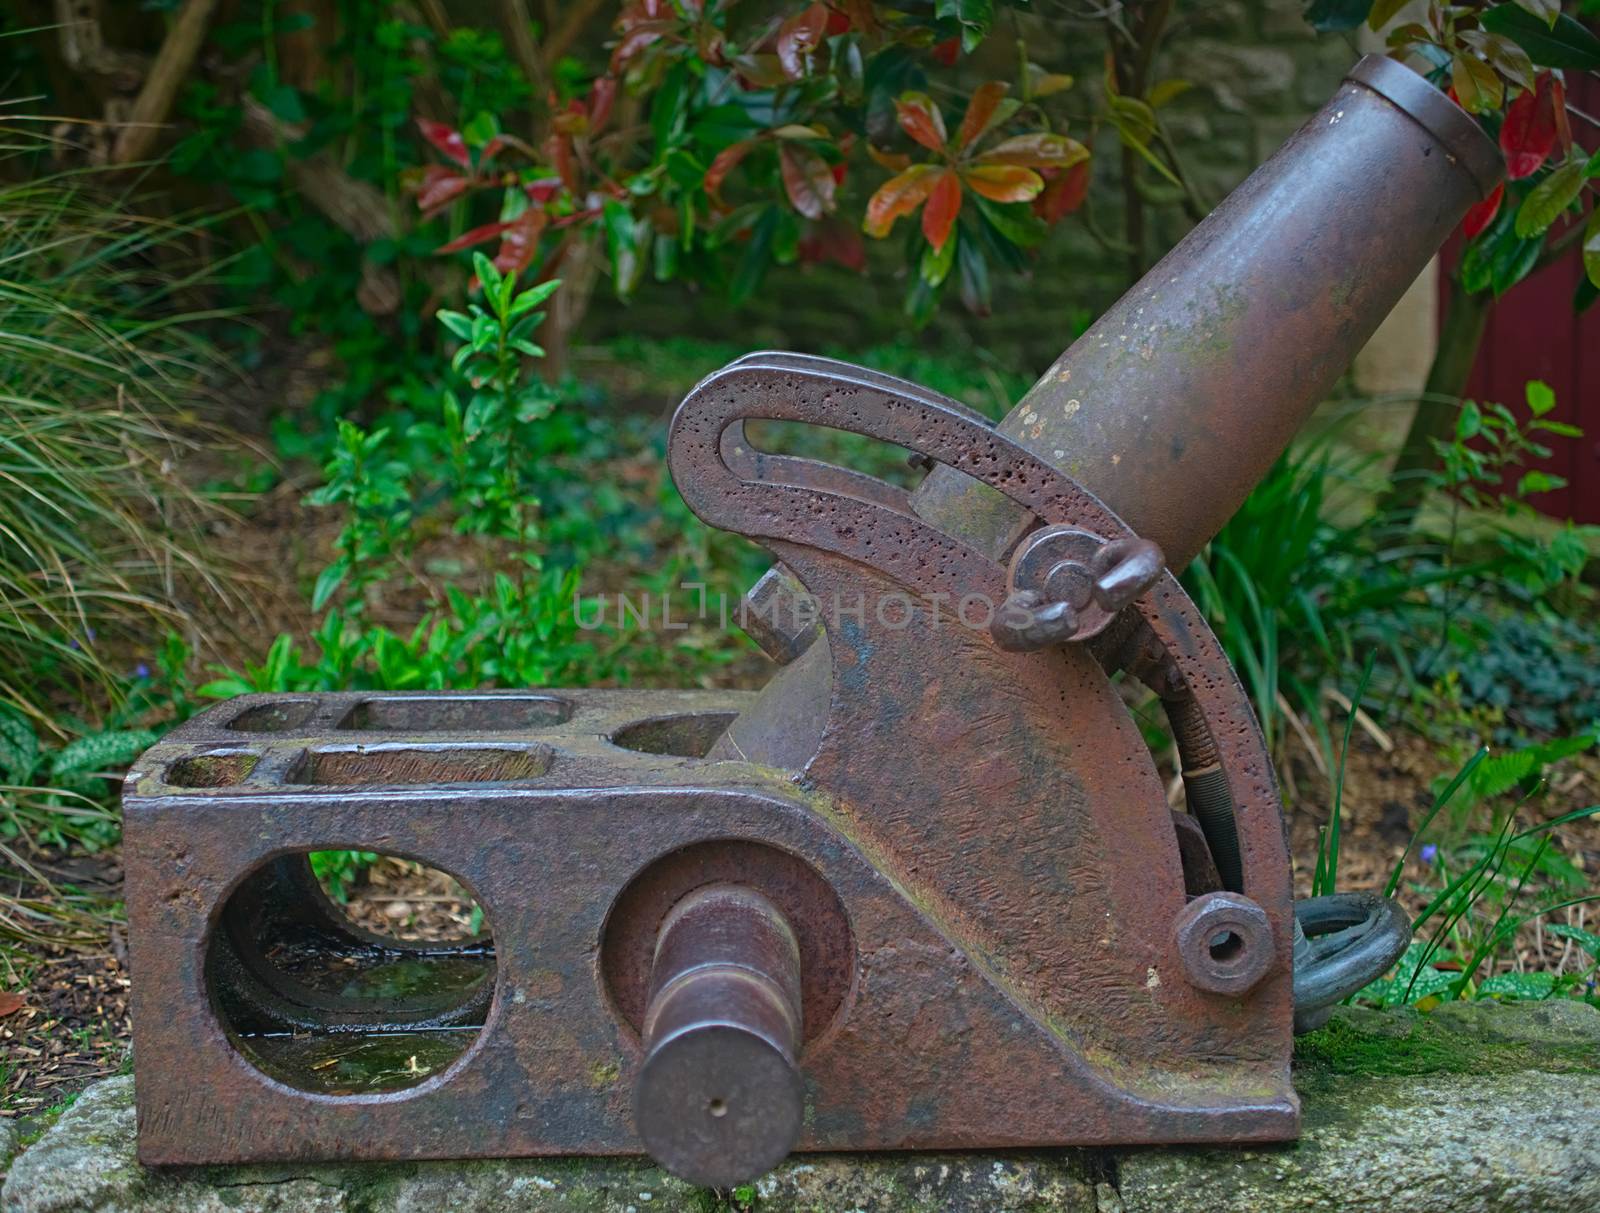 Old vintage rusted small mortar canon with greenery in background